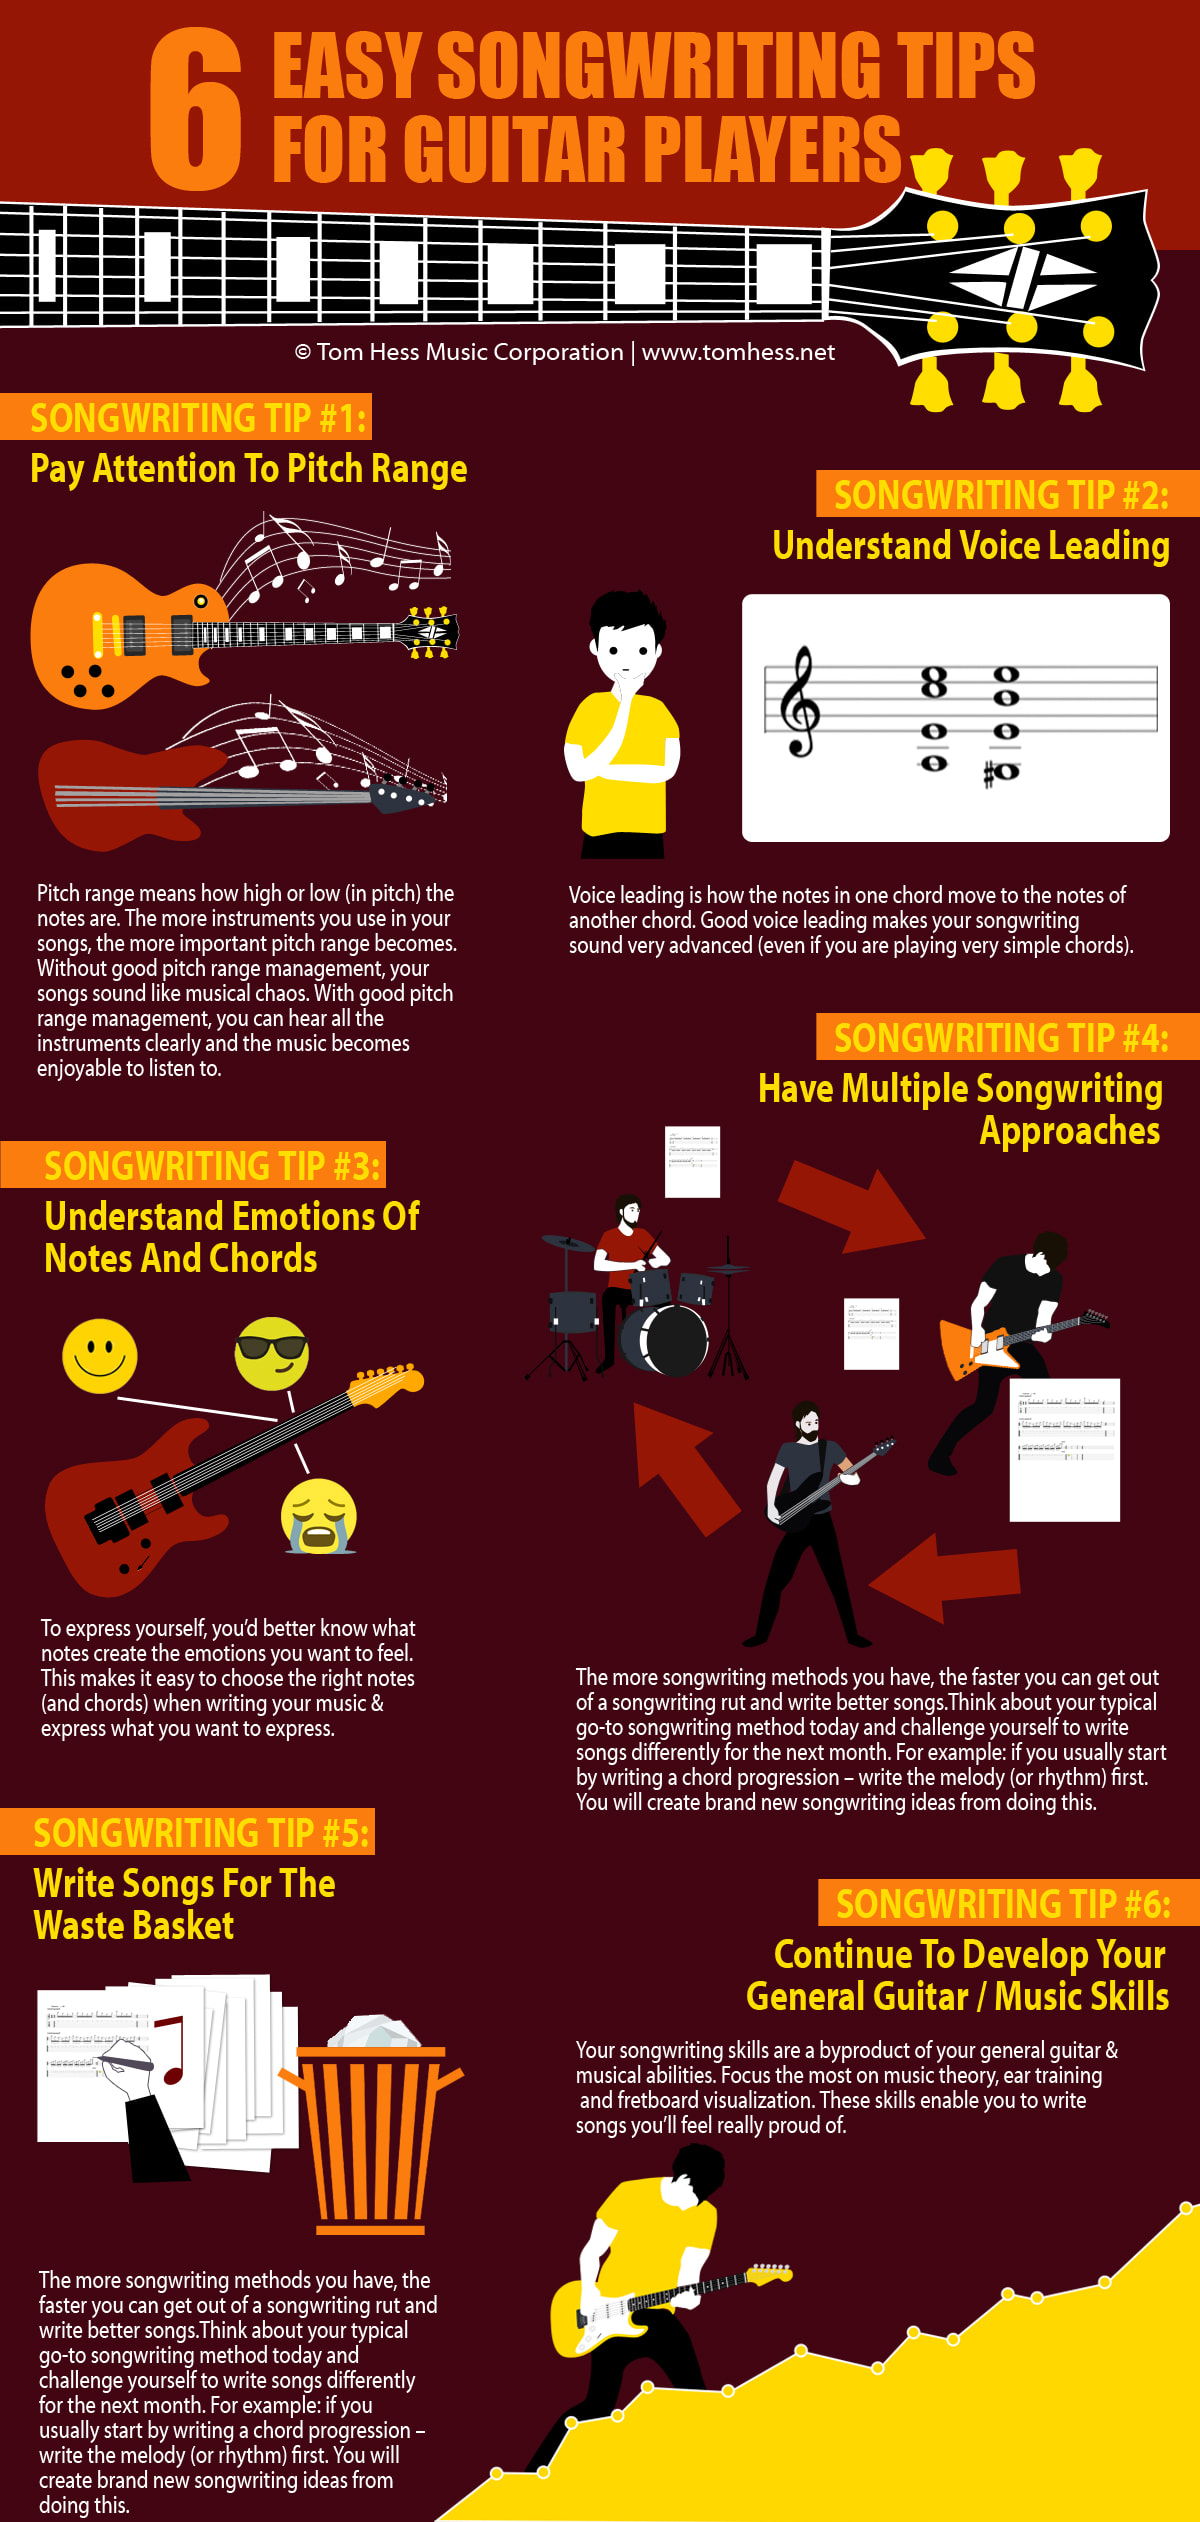 Awasome 6 Quick Songwriting Tips For Being A Better Songwriter Ideas